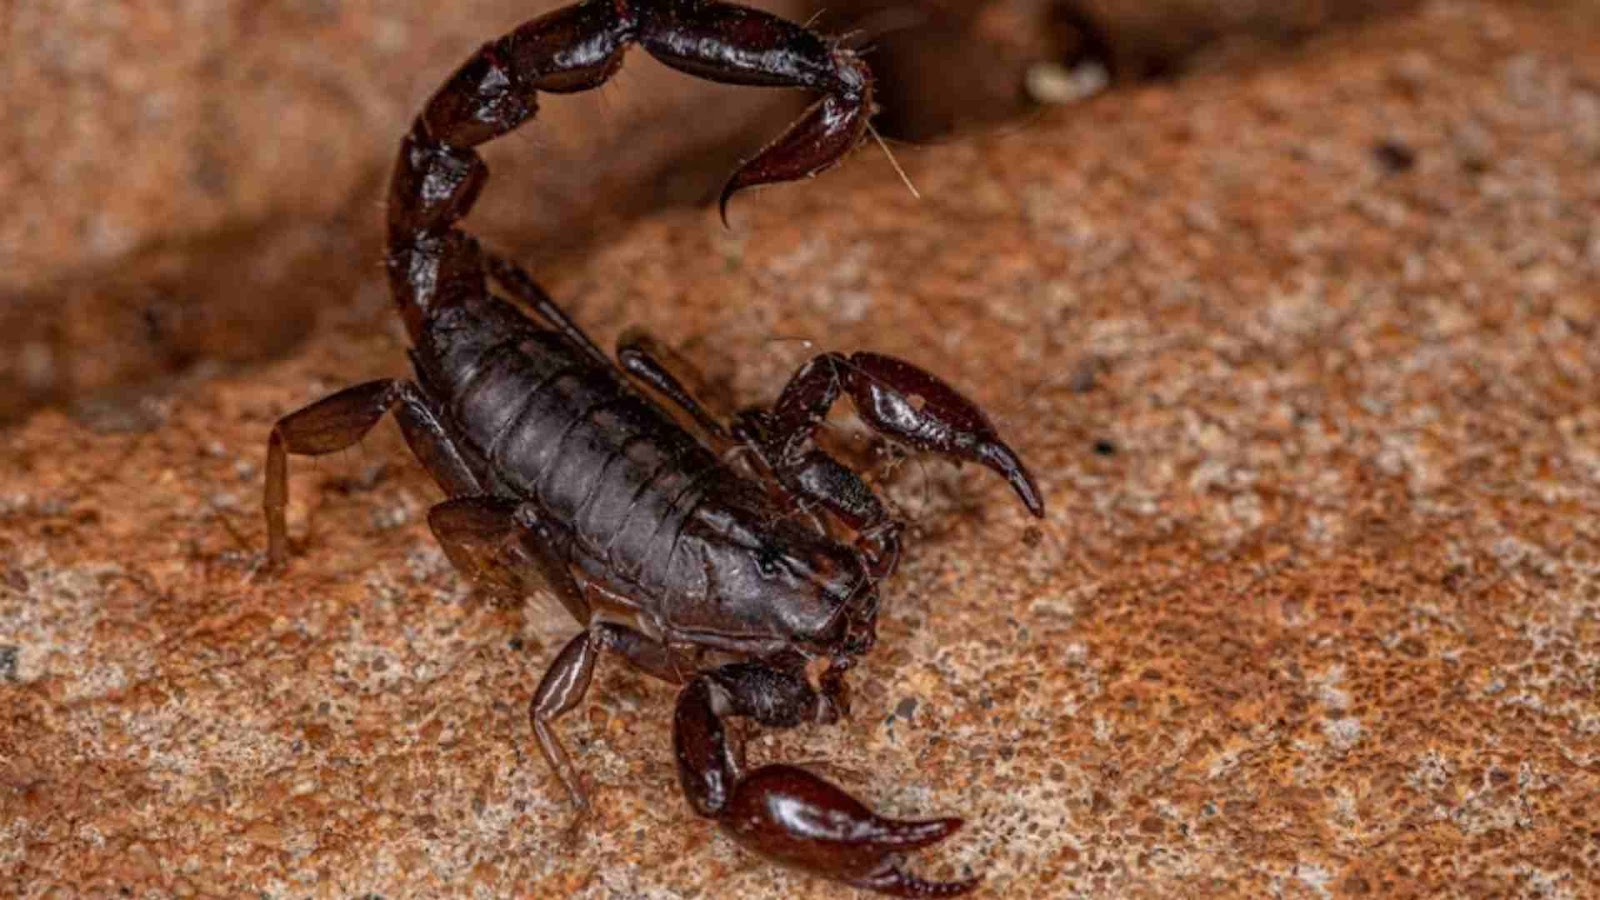 What are scorpions?